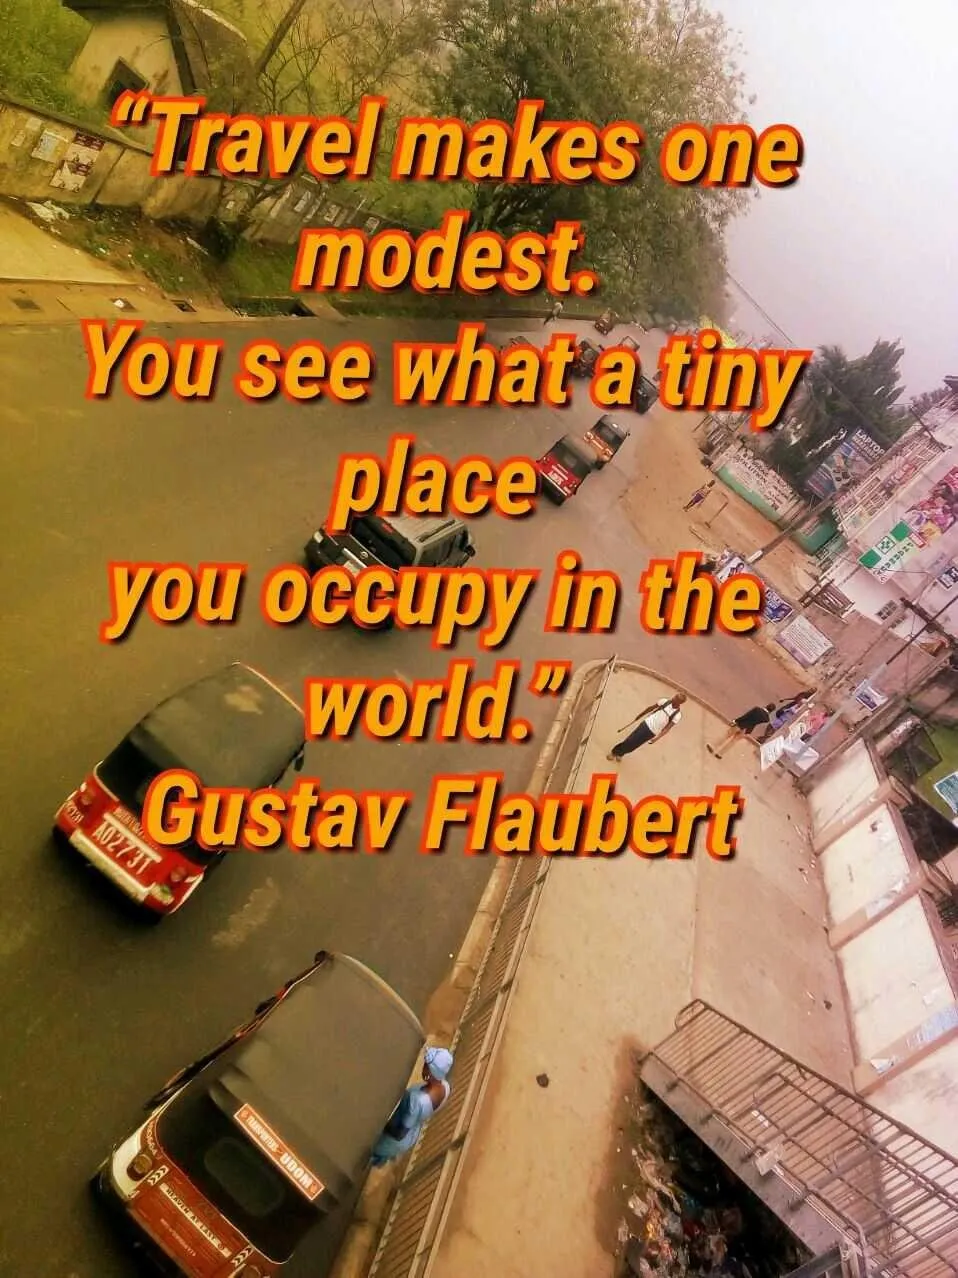 My Photo/Quote For Tuesday Orange On Colorchallenge Photo In Uyo, A